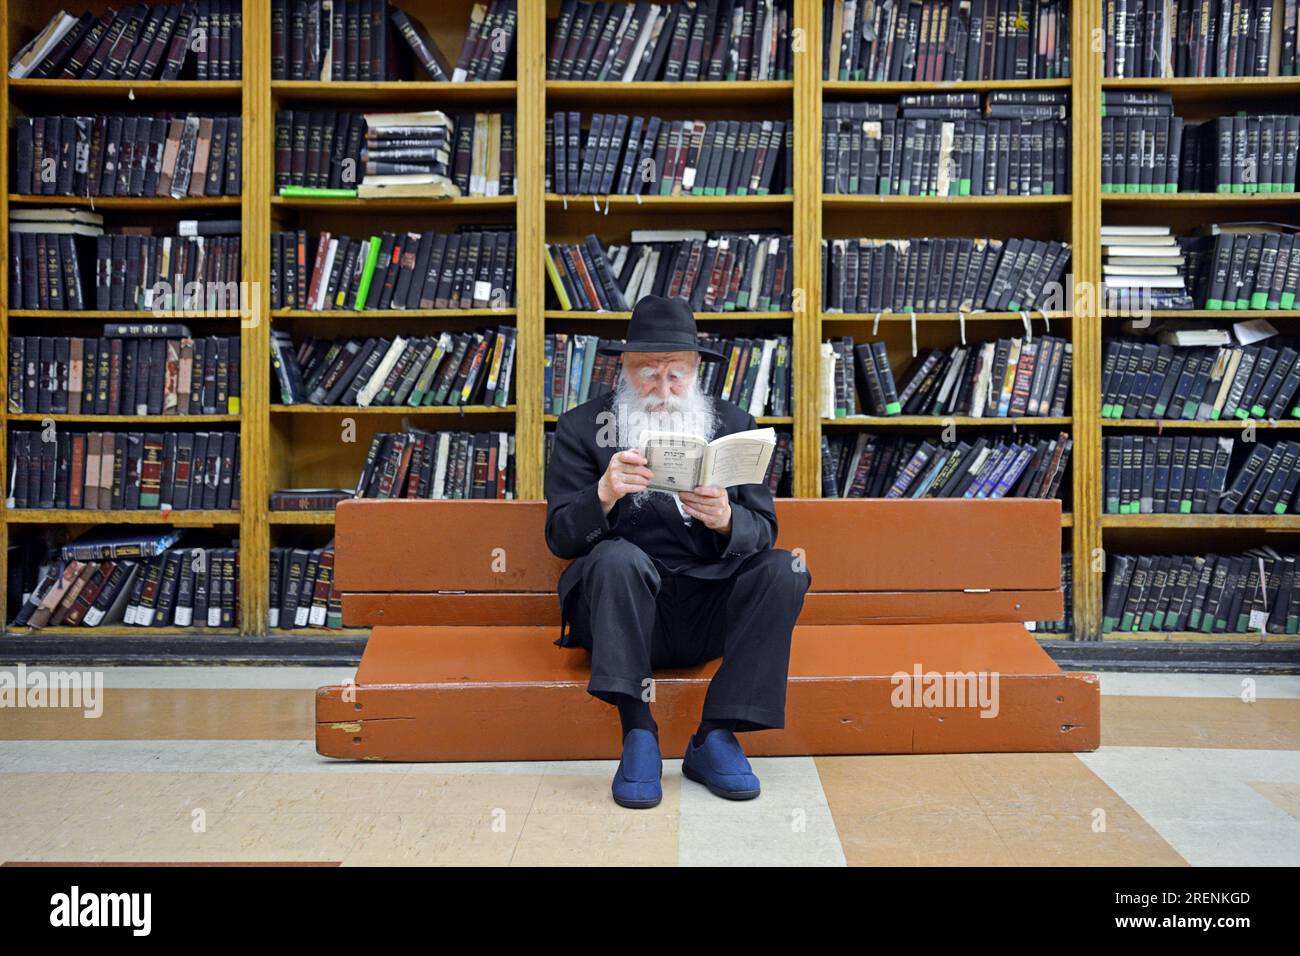 Chabad rabbi sits on an overturned bench and wears plastic shoes on Tisha B'av following the mourning rituals of the saddest day of the Jewish year. Stock Photo